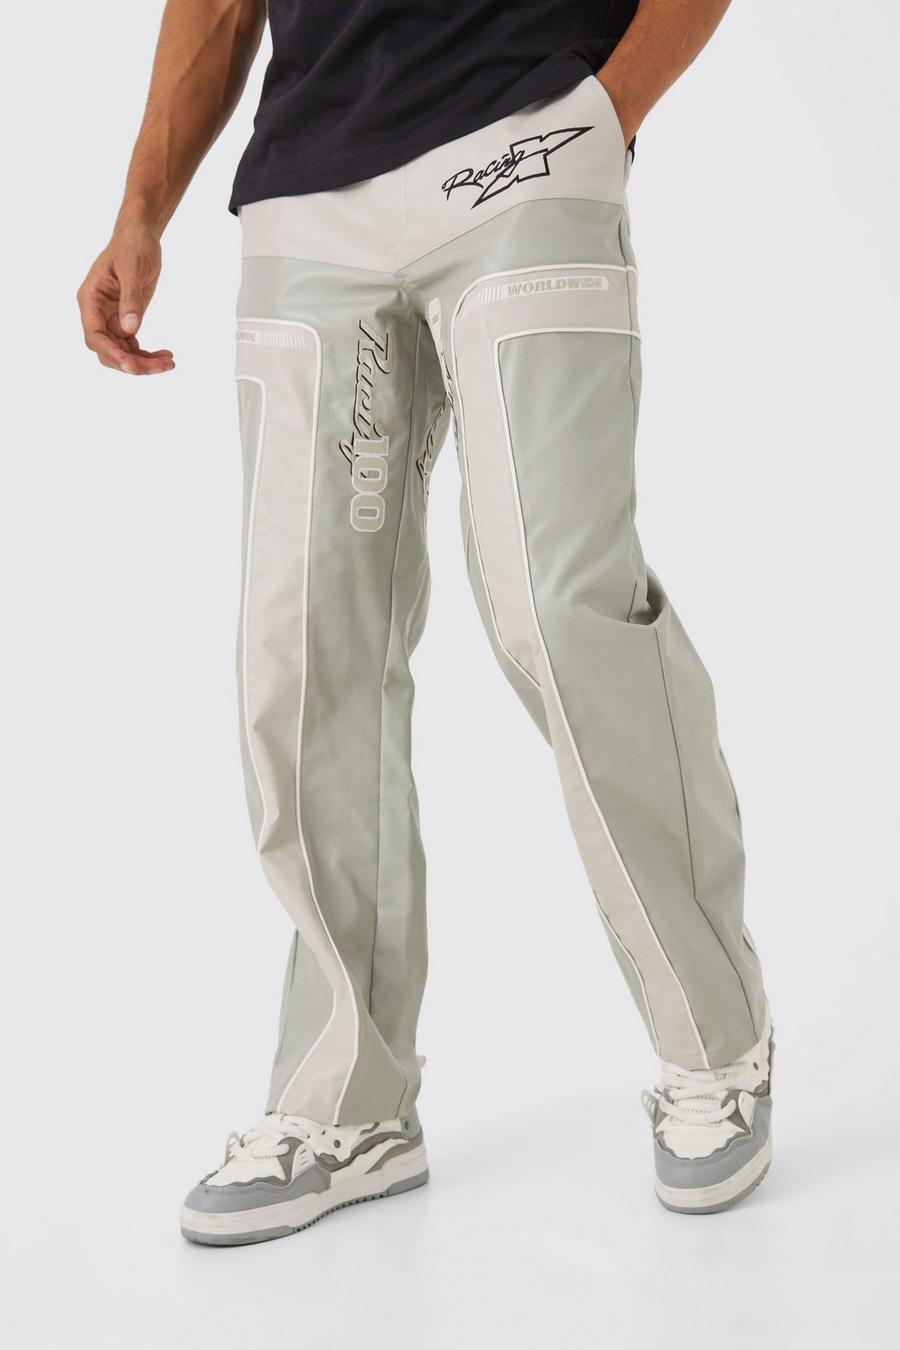 Men's Trousers - Buy Linen Trousers for Men Online with Upto 50% Off